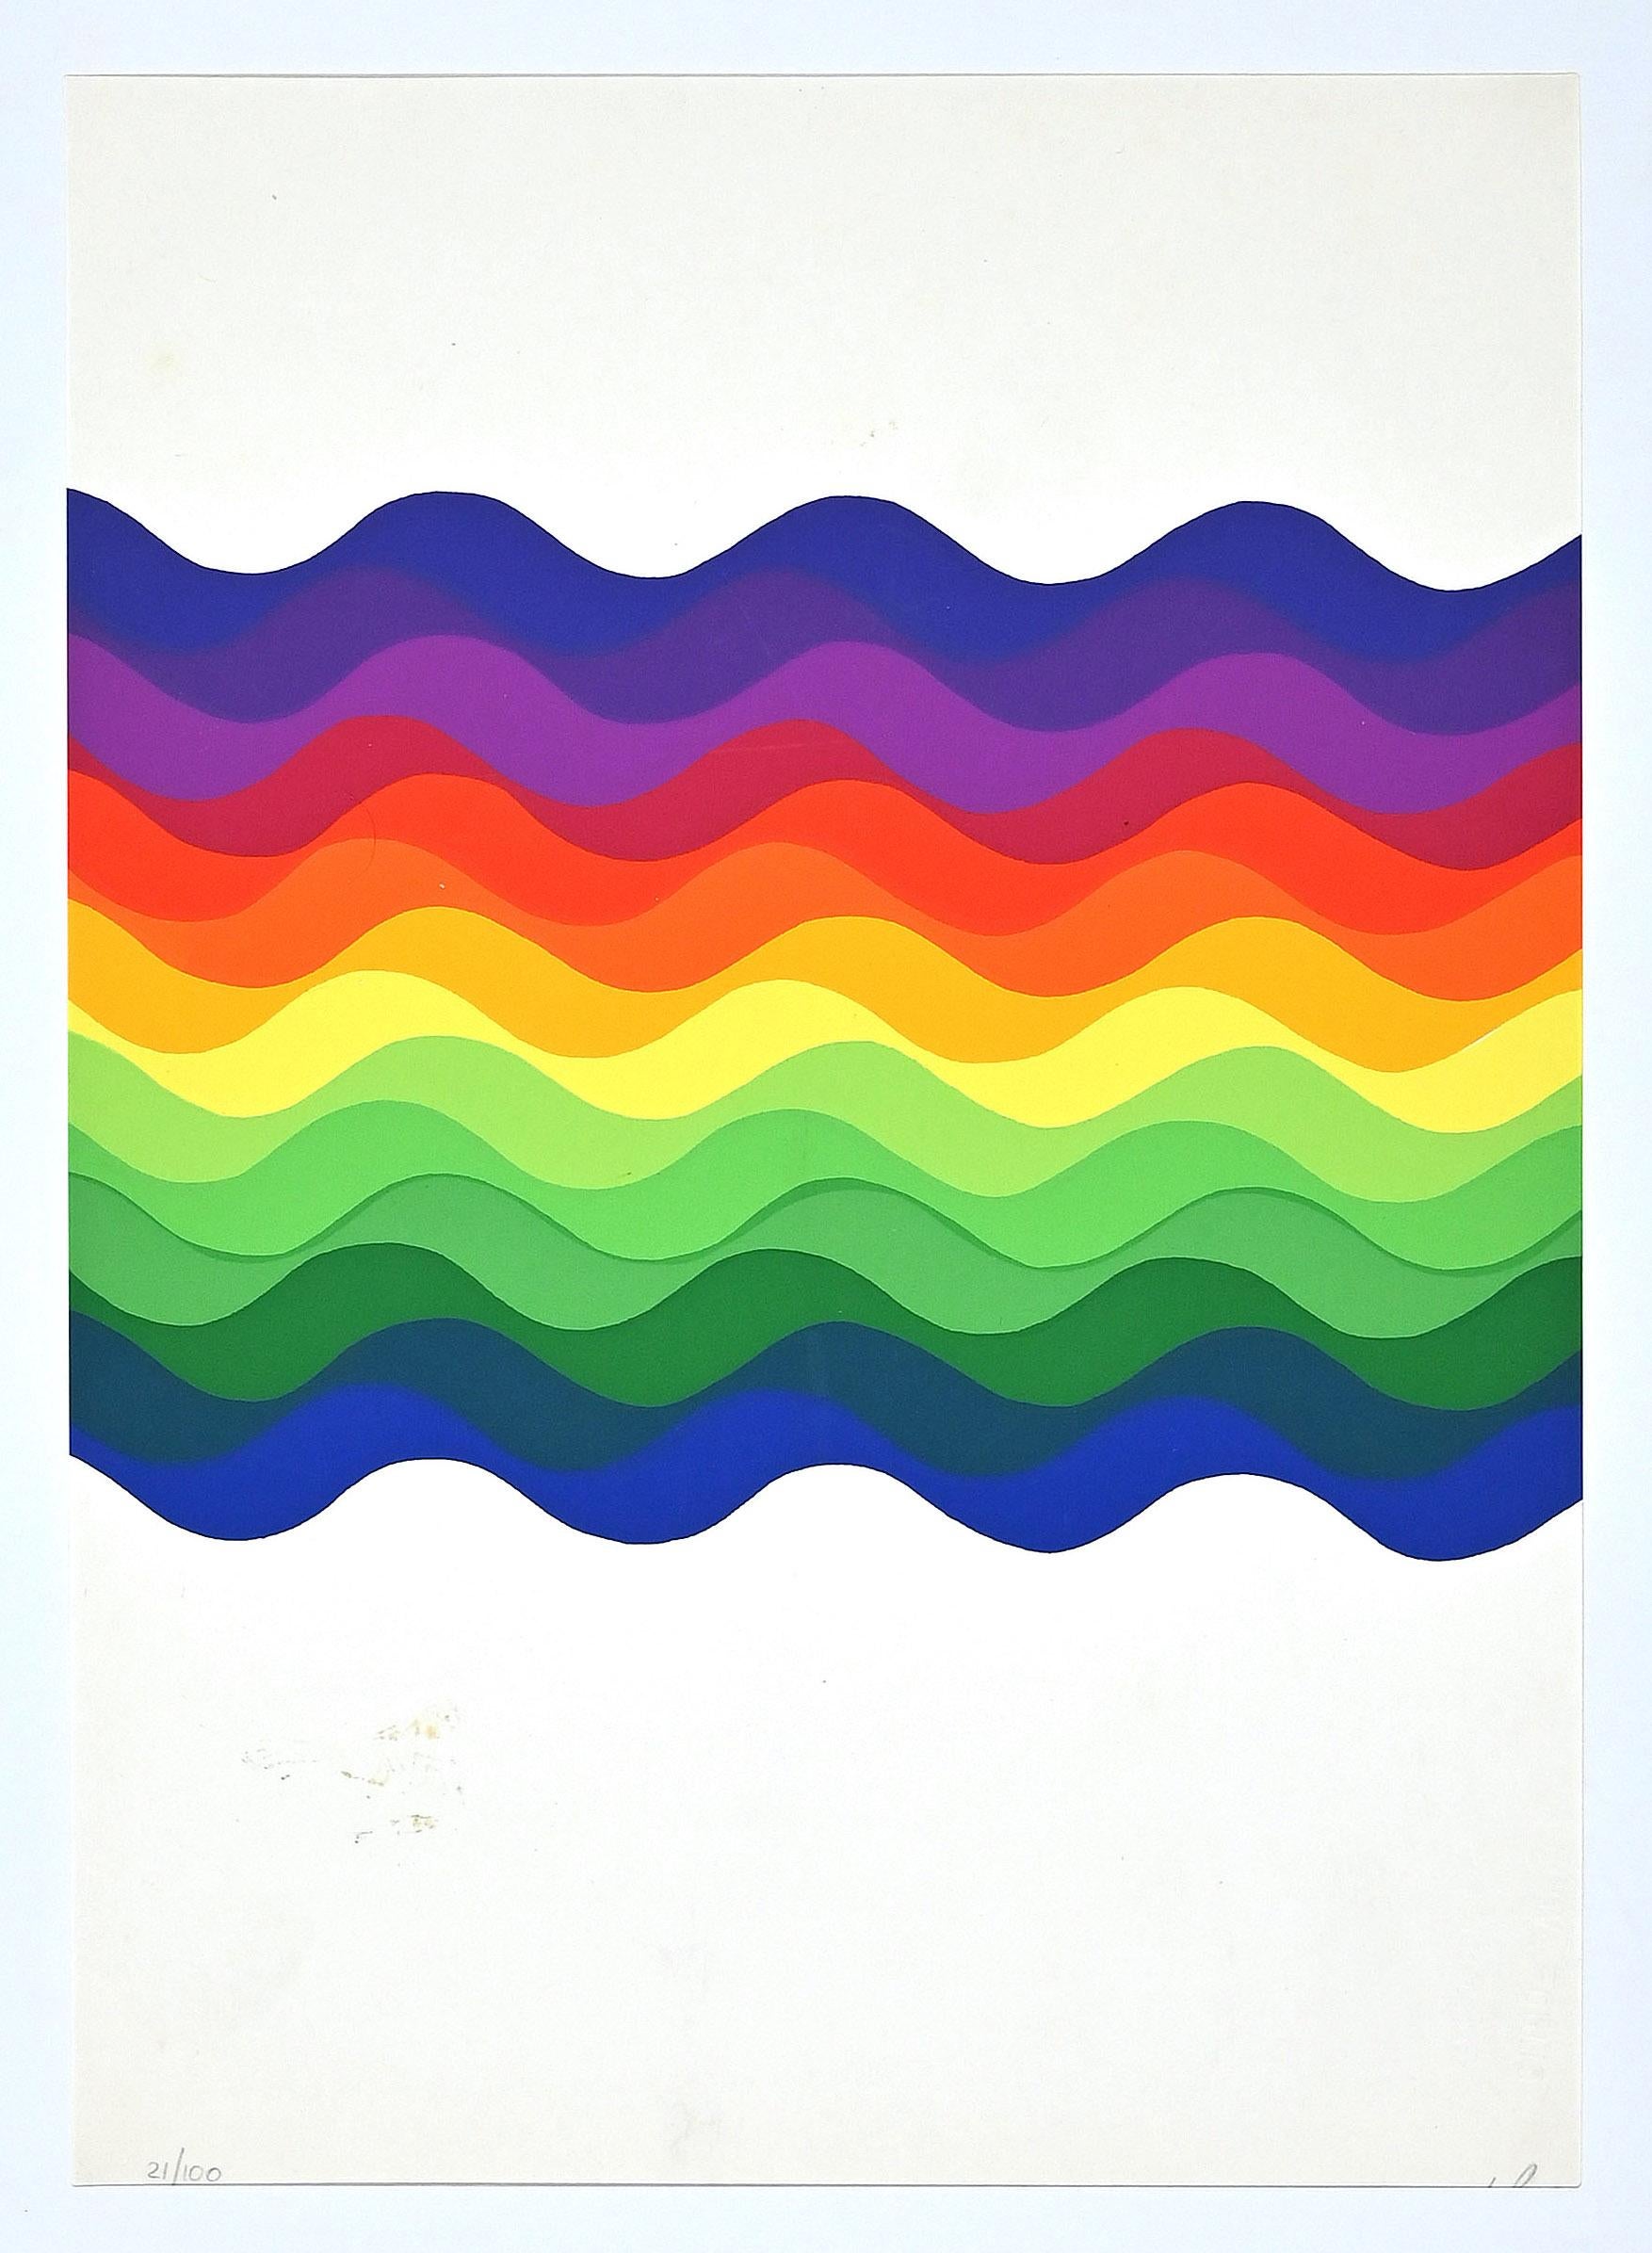 Composition - Color Waves is an original screen print realized in 1976 by the Argentinian artist Julio Le Parc.

Hand-signed in pencil by the artist on the lower right. Numbered on the lower left. Edition of 100. 
On the lower right, the dry stamp